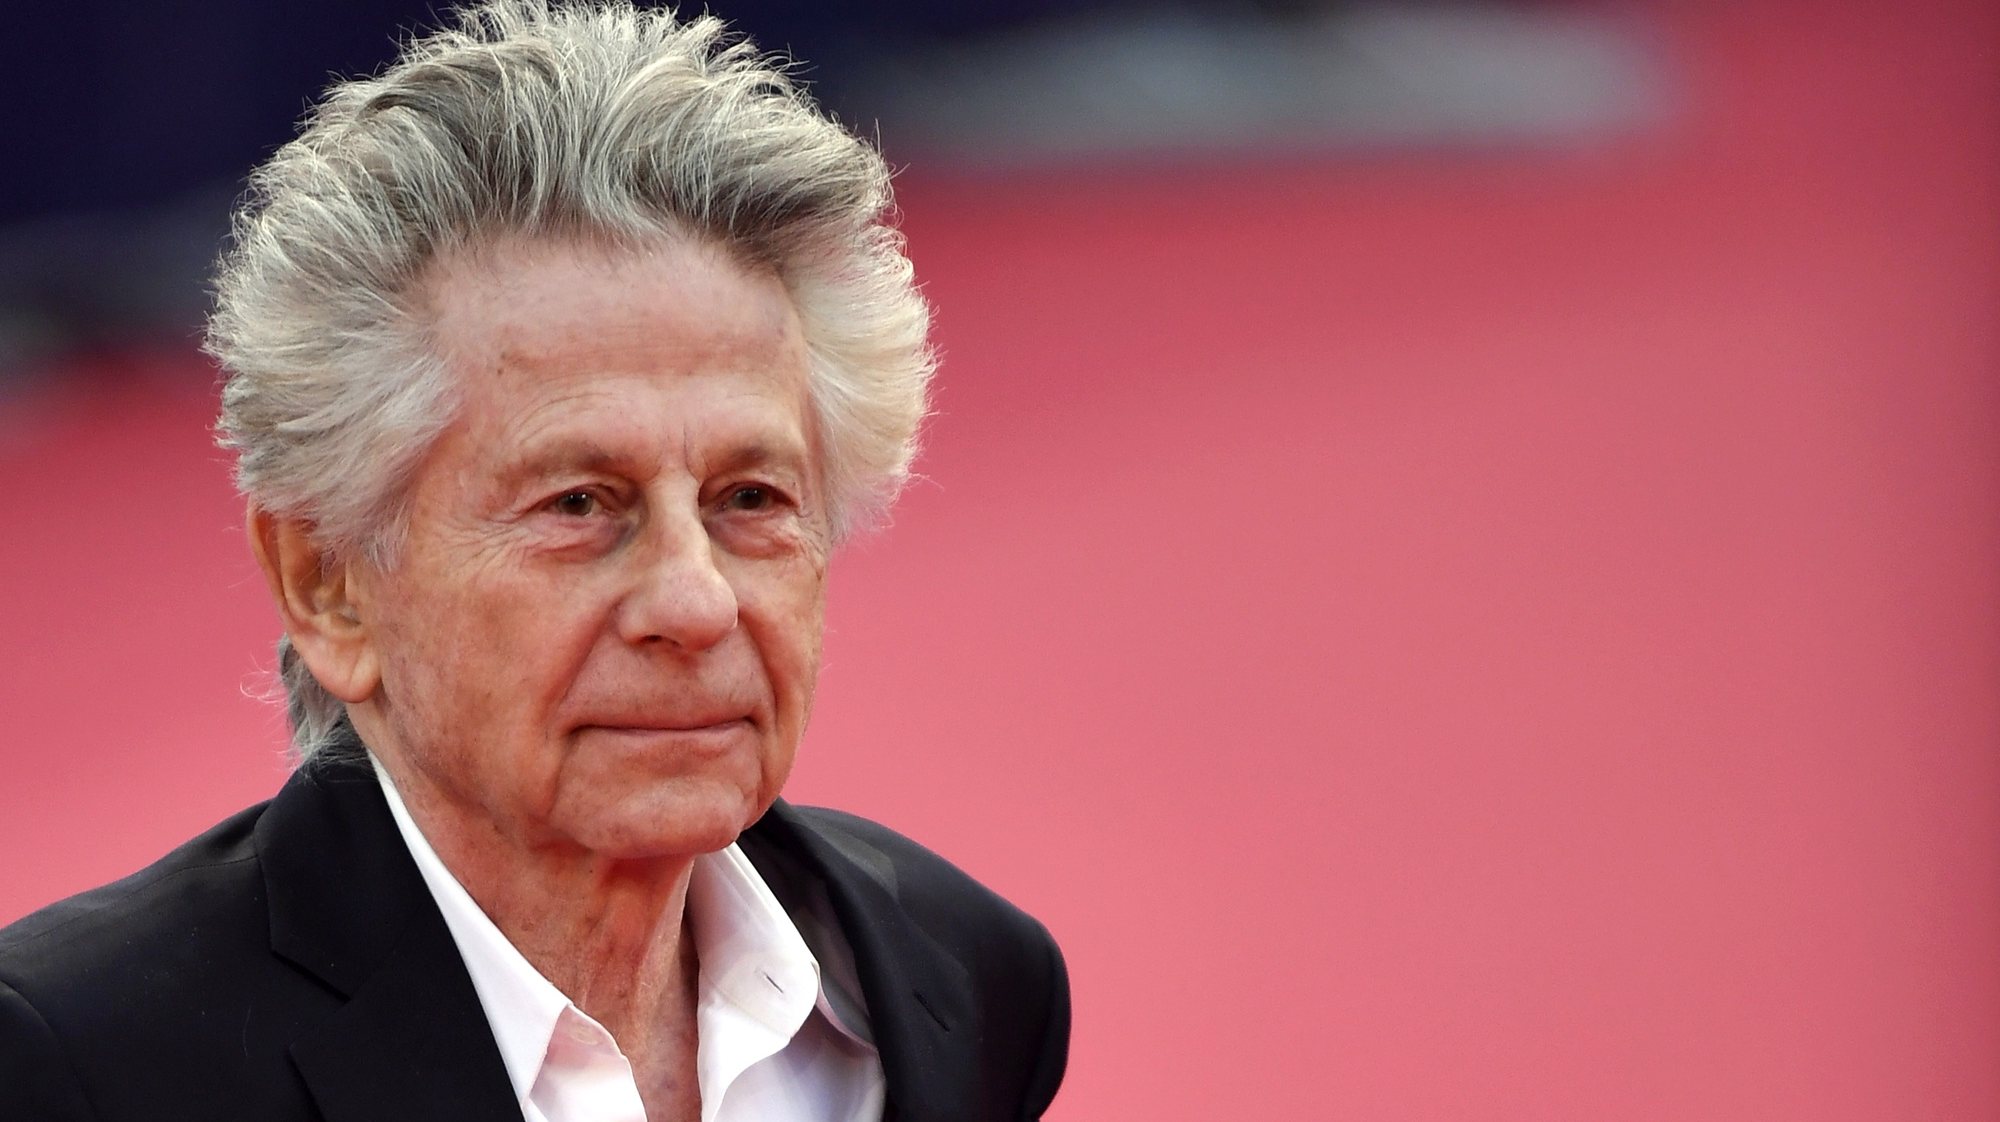 epa08251911 (FILE) Polish-French director Roman Polanski arrives on the red carpet prior to the premiere &#039;Music of My Life (Blinded by the Light)&#039; during the 45th Deauville American Film Festival, in Deauville, France, 07 September 2019 (reissued 27 February 2020). Roman Polanski announced in a statement on 27 February 2020 that he will not attend the Cesar Awards ceremony in Paris on 28 February, in order to avoid criticism and demonstrations from French feminist groups.  EPA/JULIEN DE ROSA *** Local Caption *** 55450961